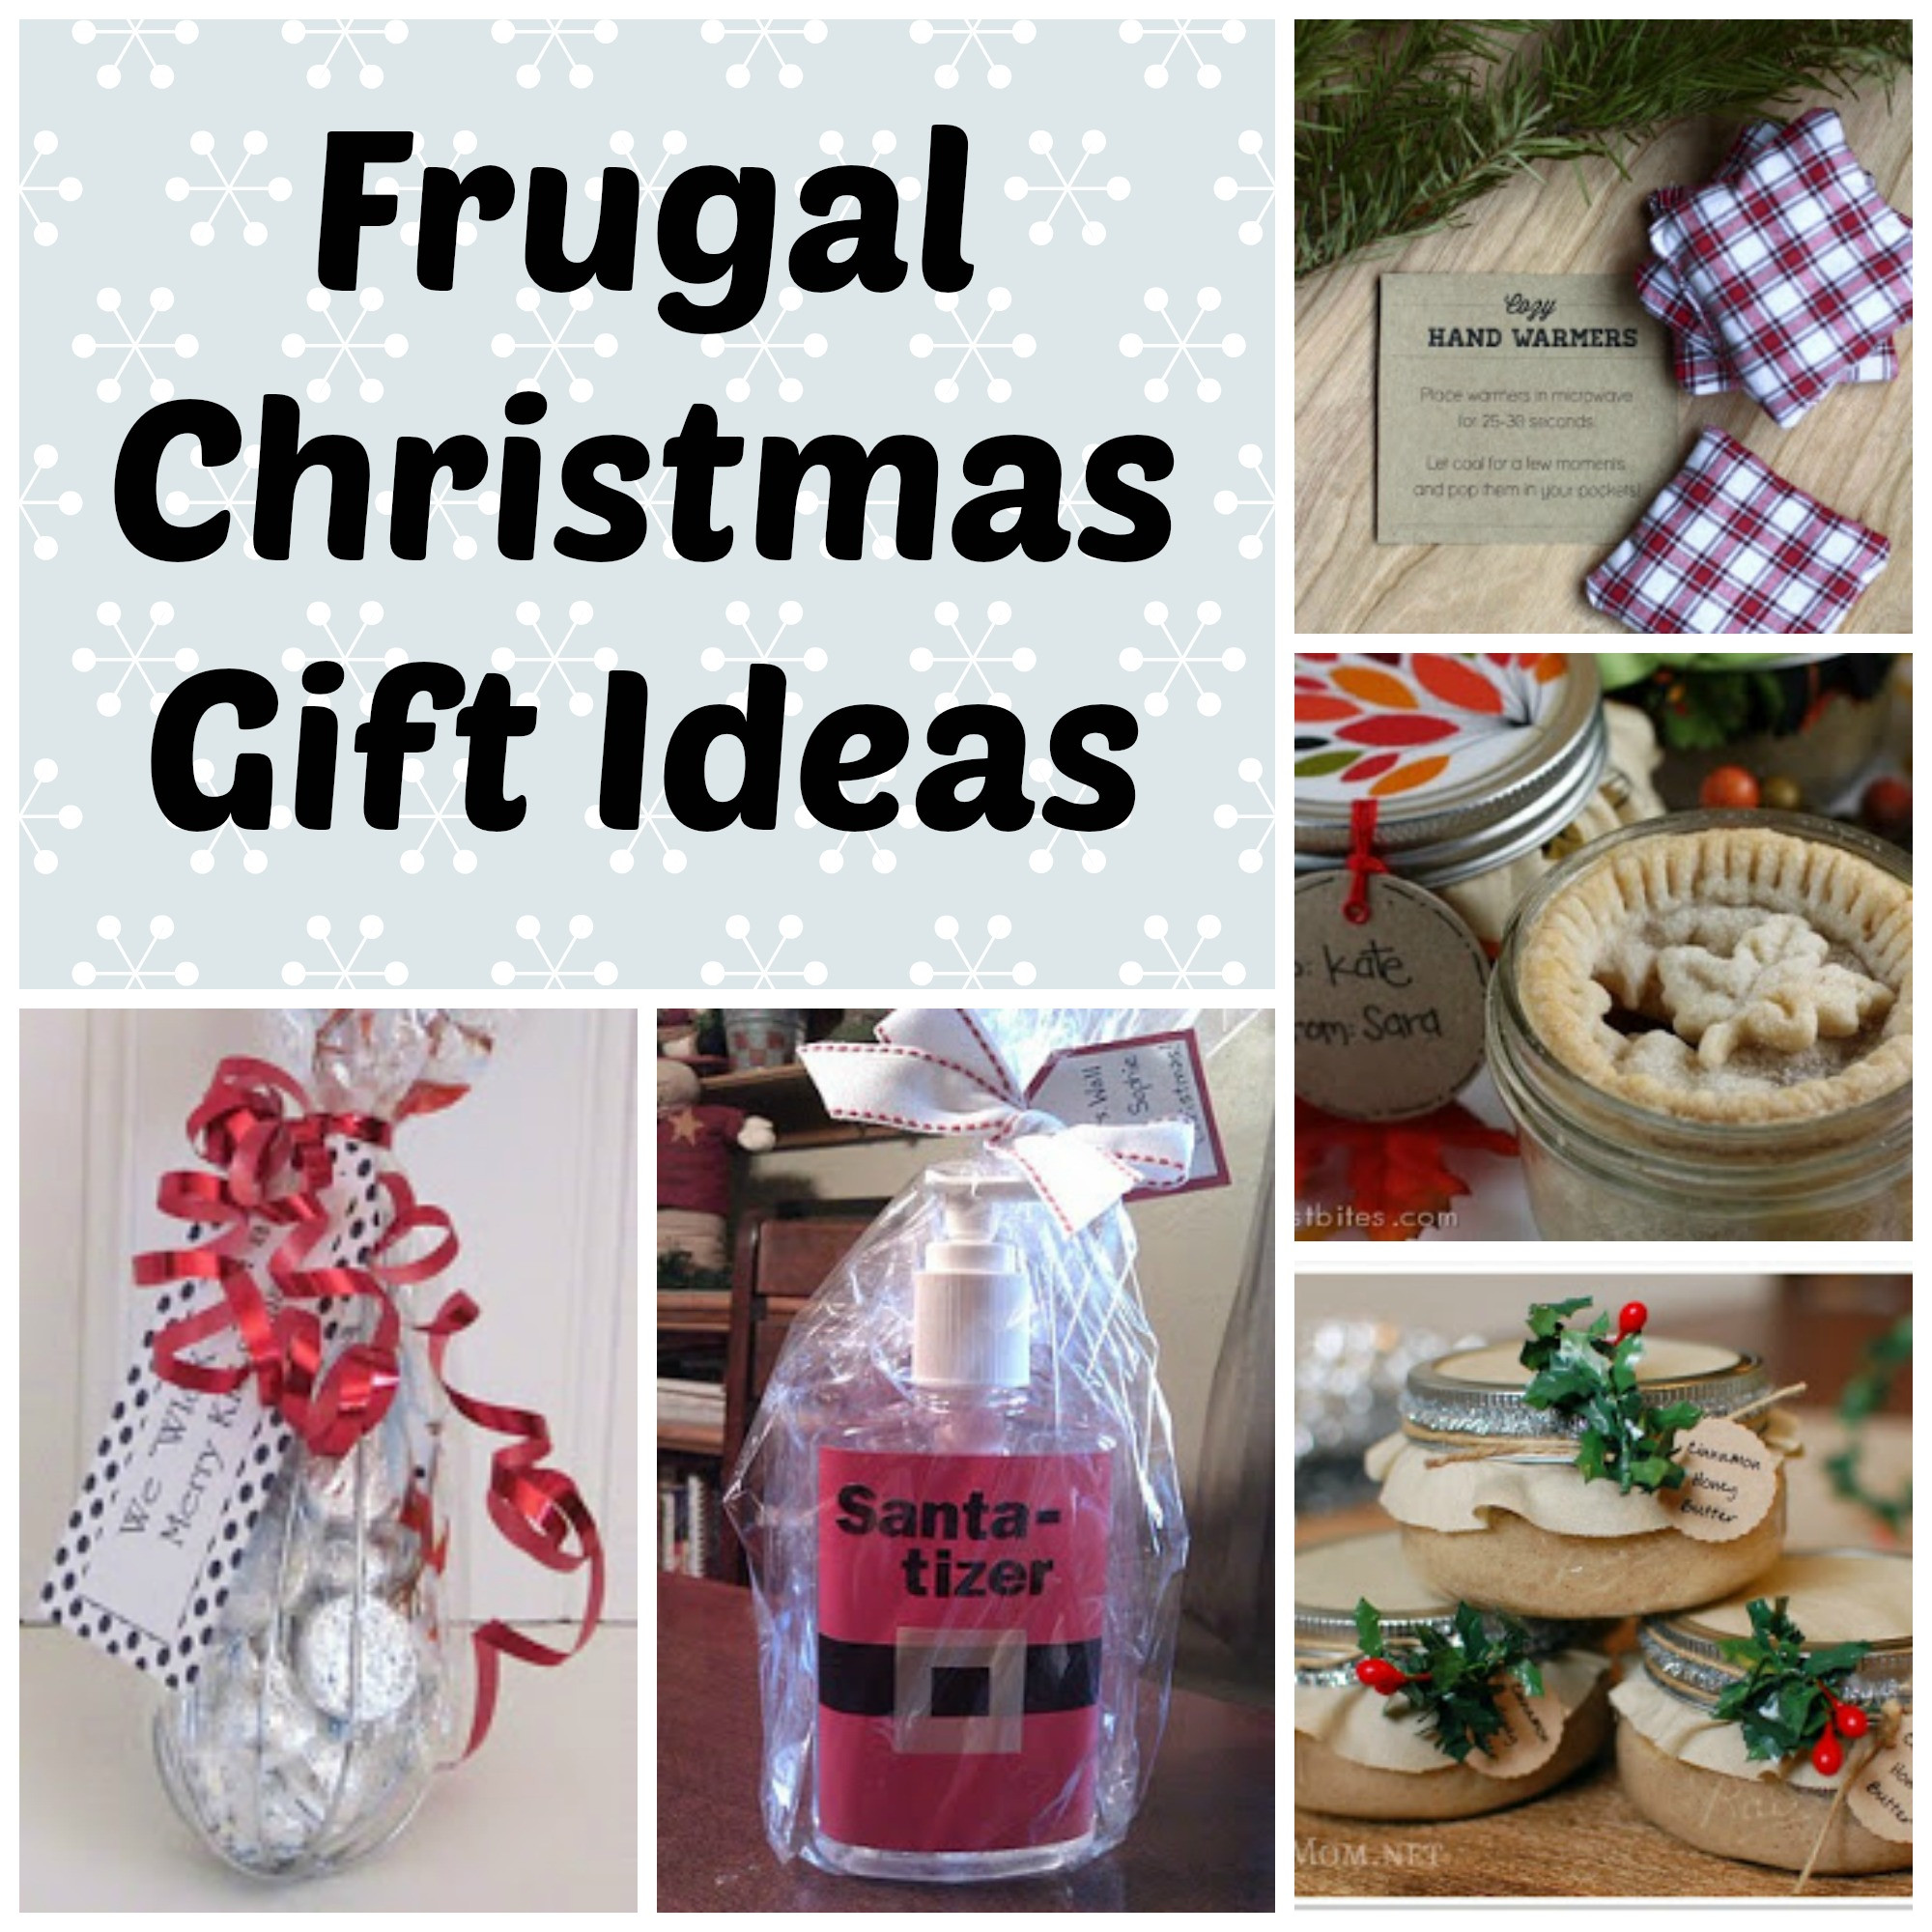 Holiday Gift Ideas For Families
 Frugal Christmas Gifts for Family Friends or Neighbors